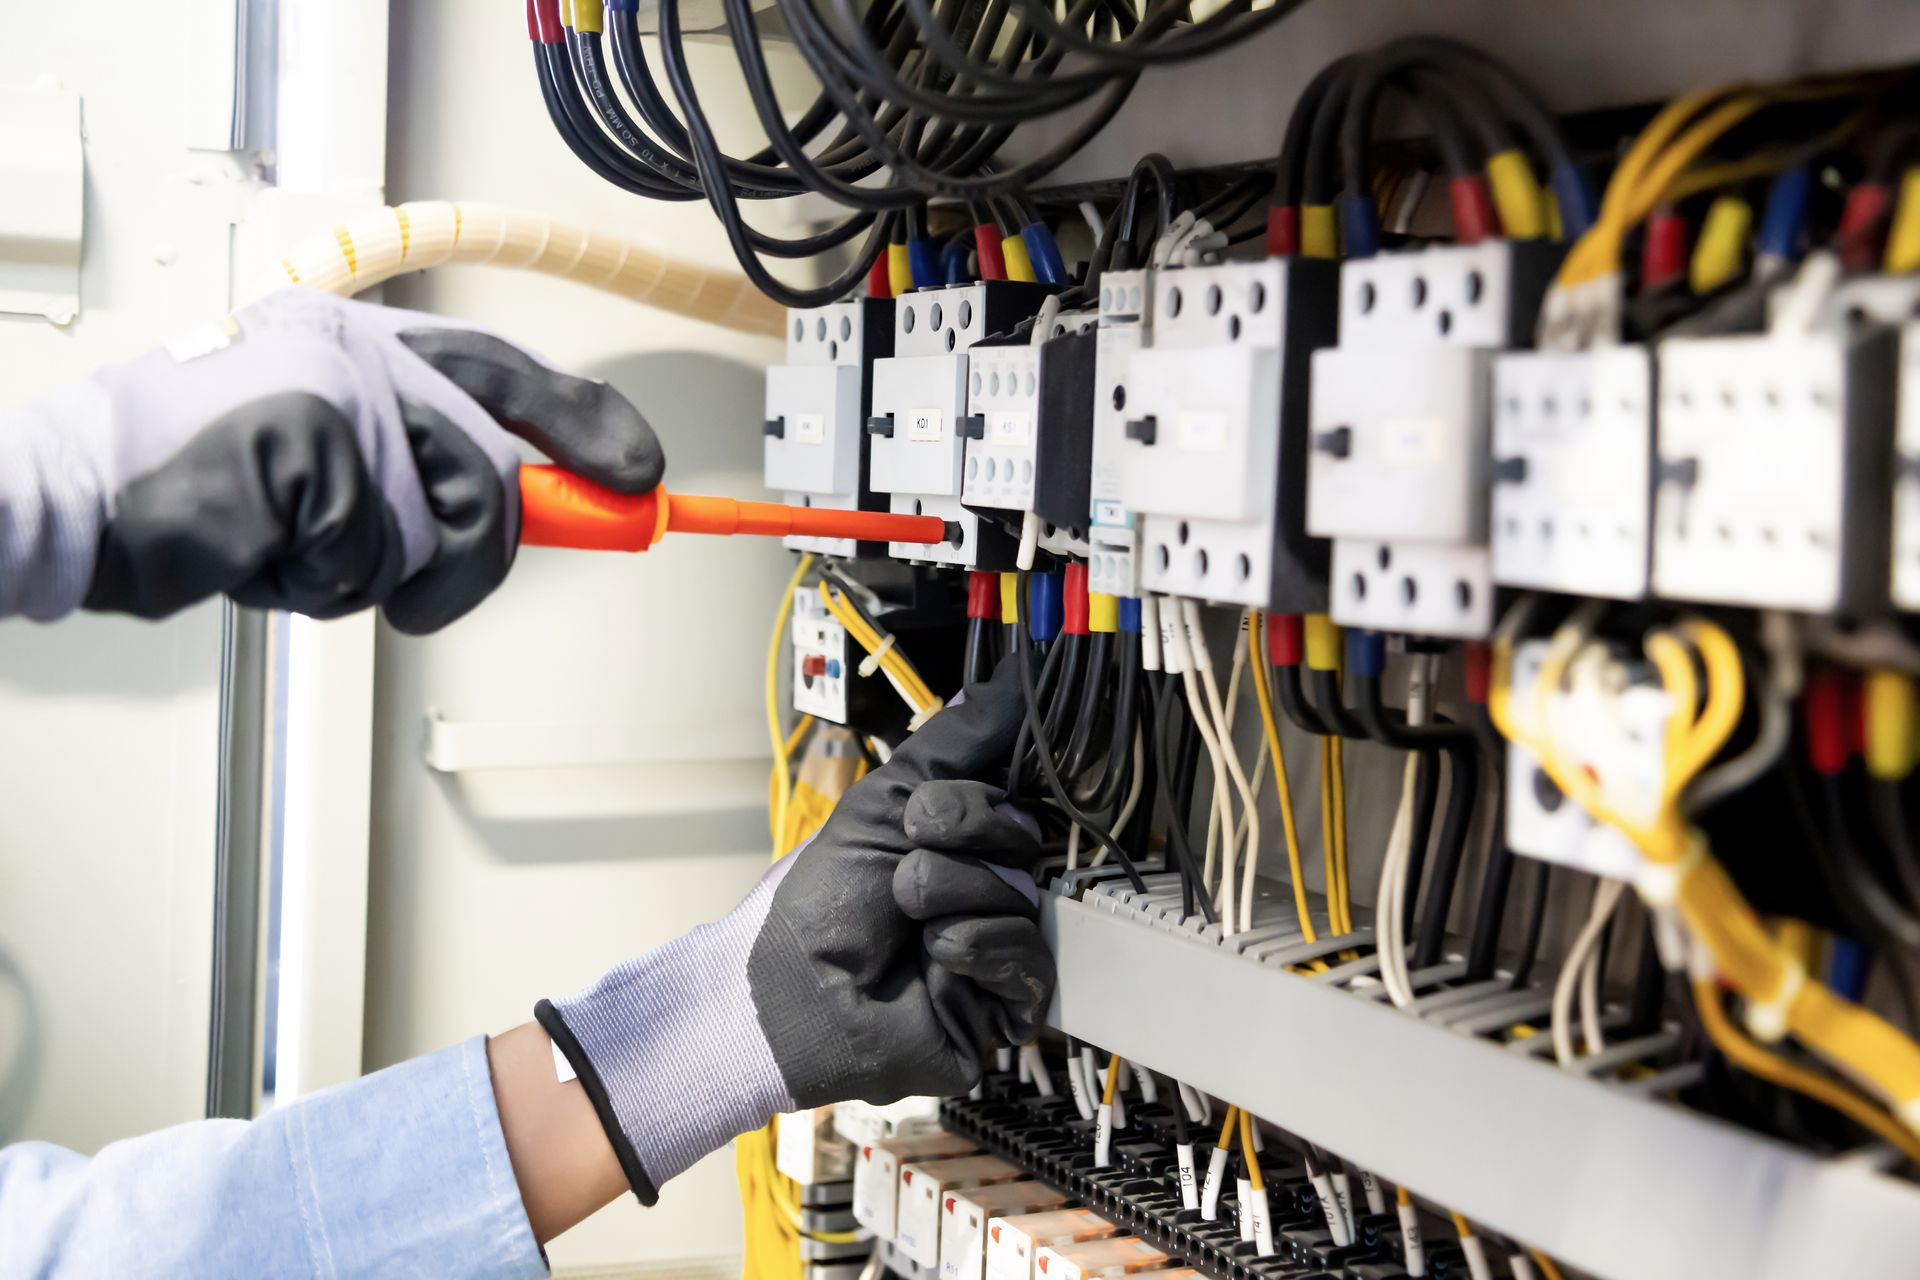 An electrician is working on an electrical panel with a screwdriver.